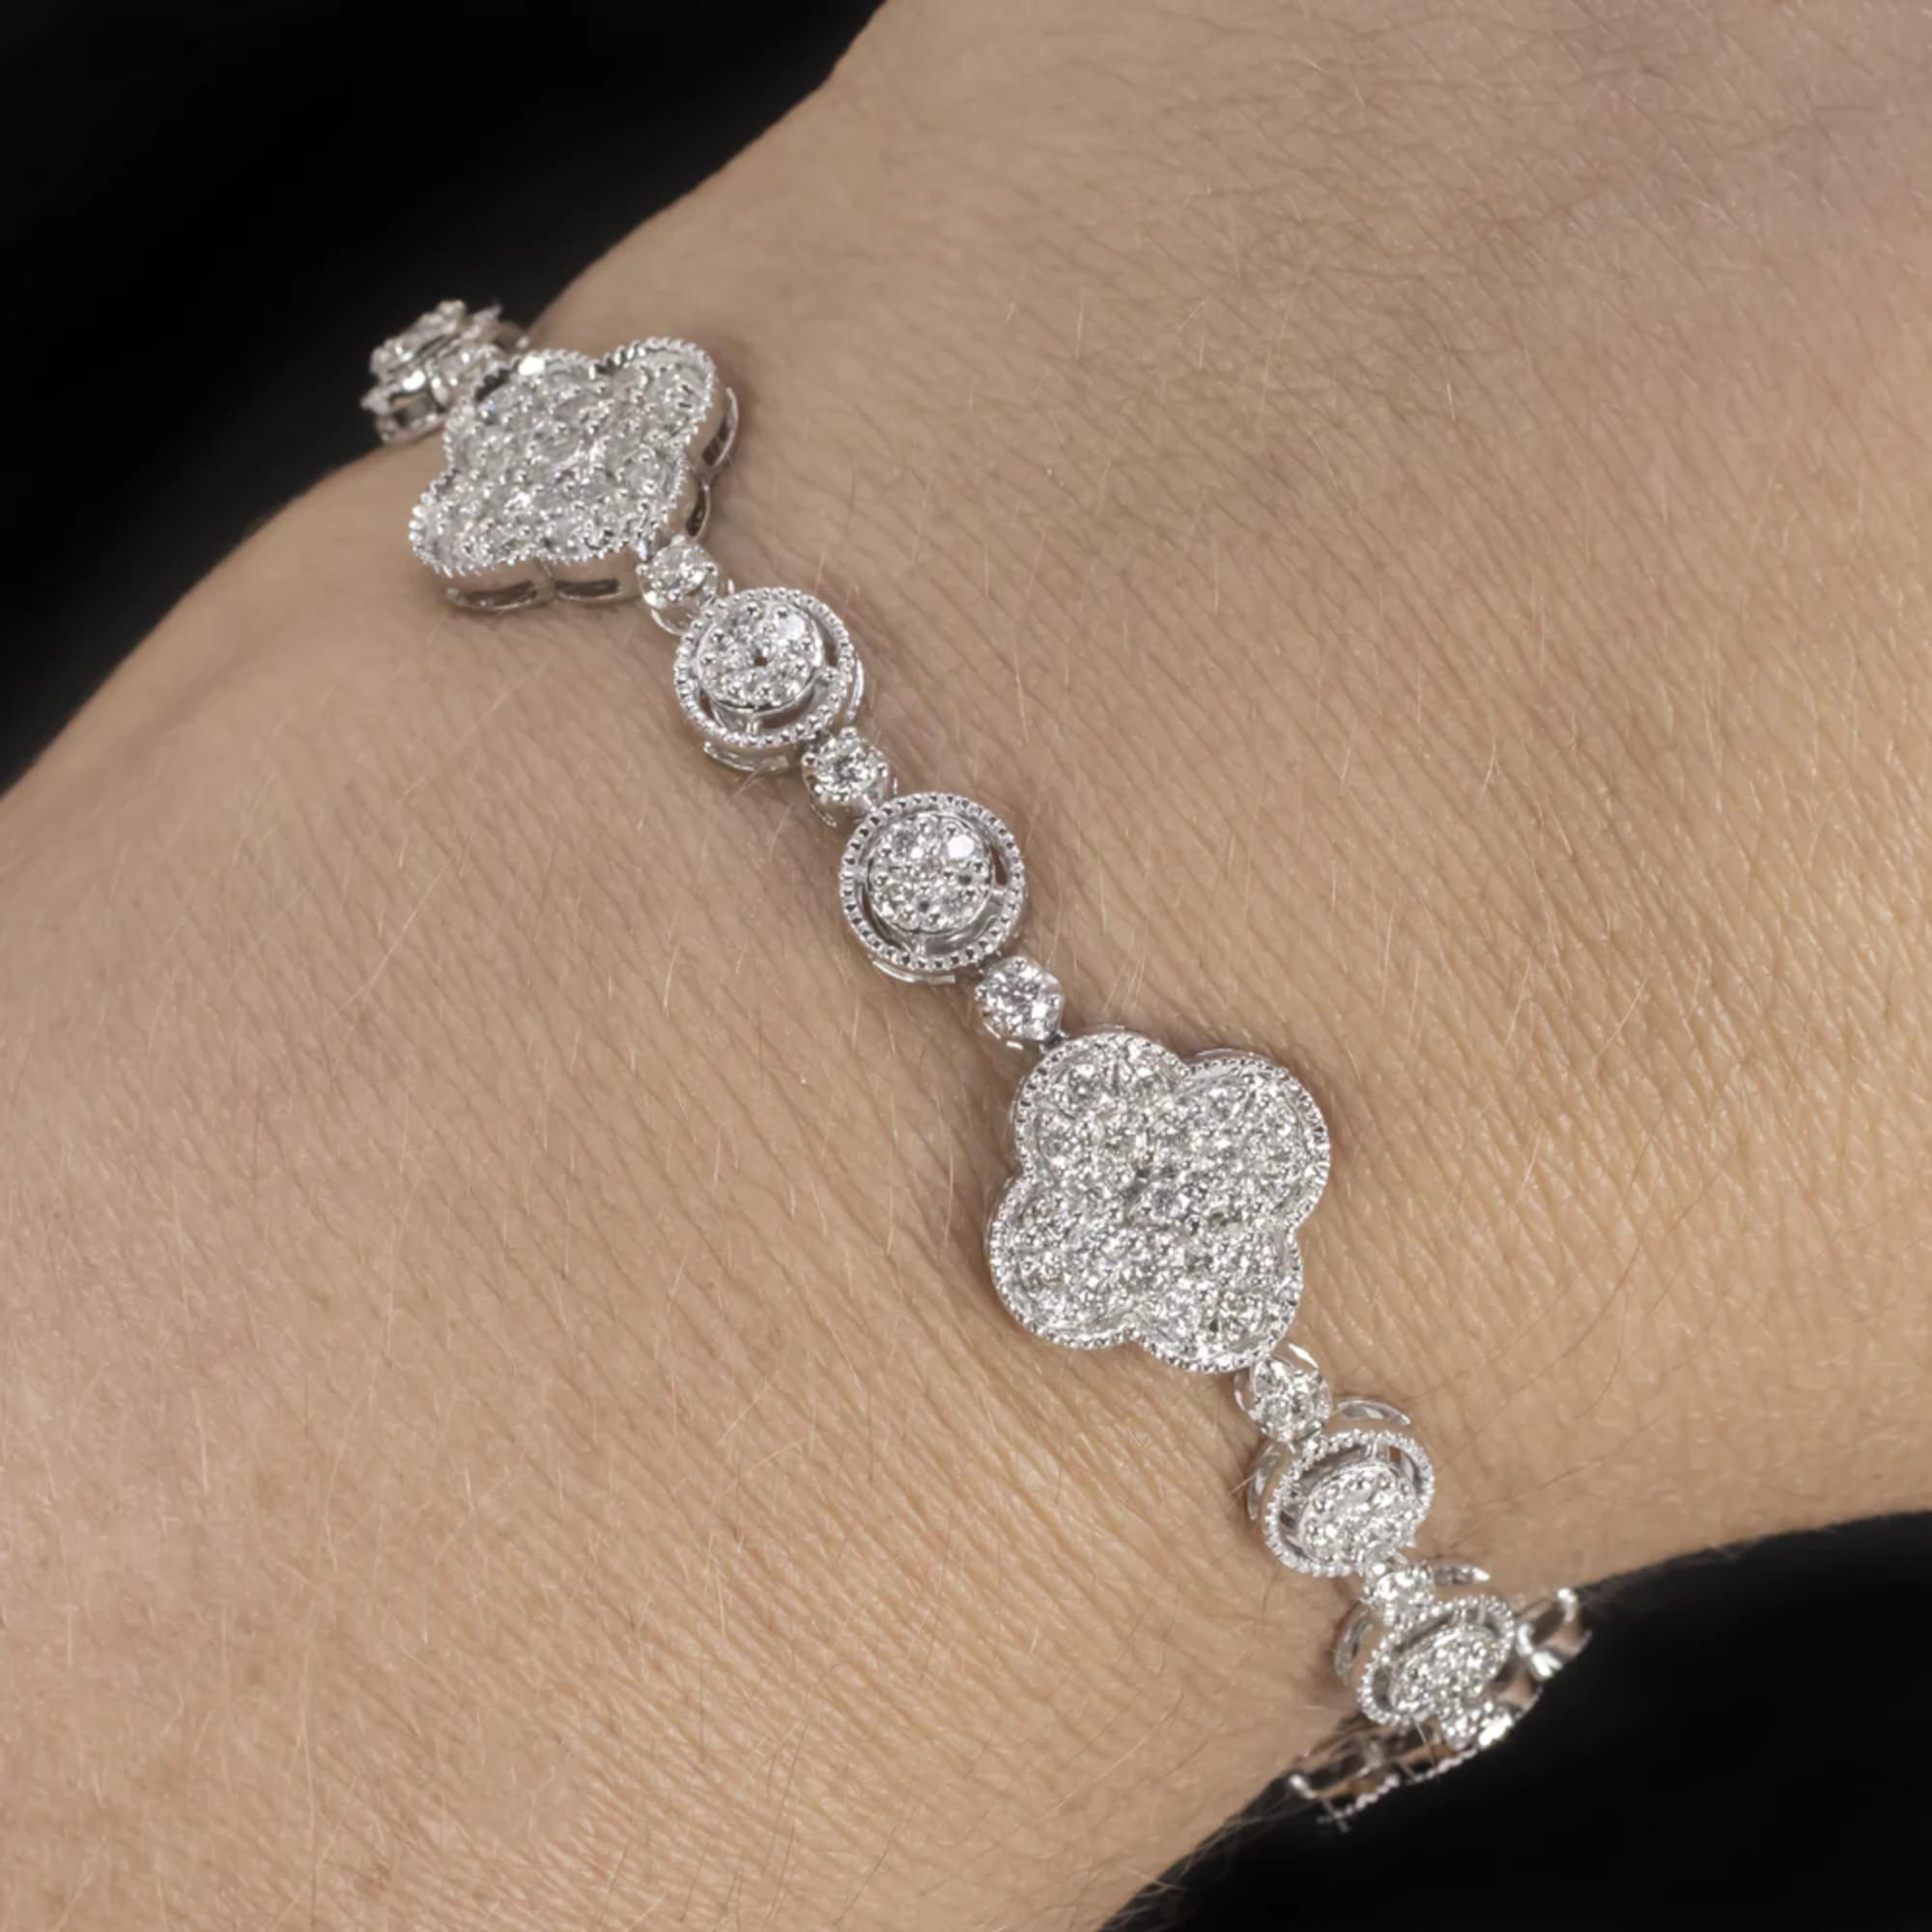 Introducing our breathtaking diamond bracelet, a true masterpiece of elegance and glamour. This exquisite piece is skillfully crafted to catch the eye and captivate the heart. Its unique design features a blend of round and clover-shaped clusters